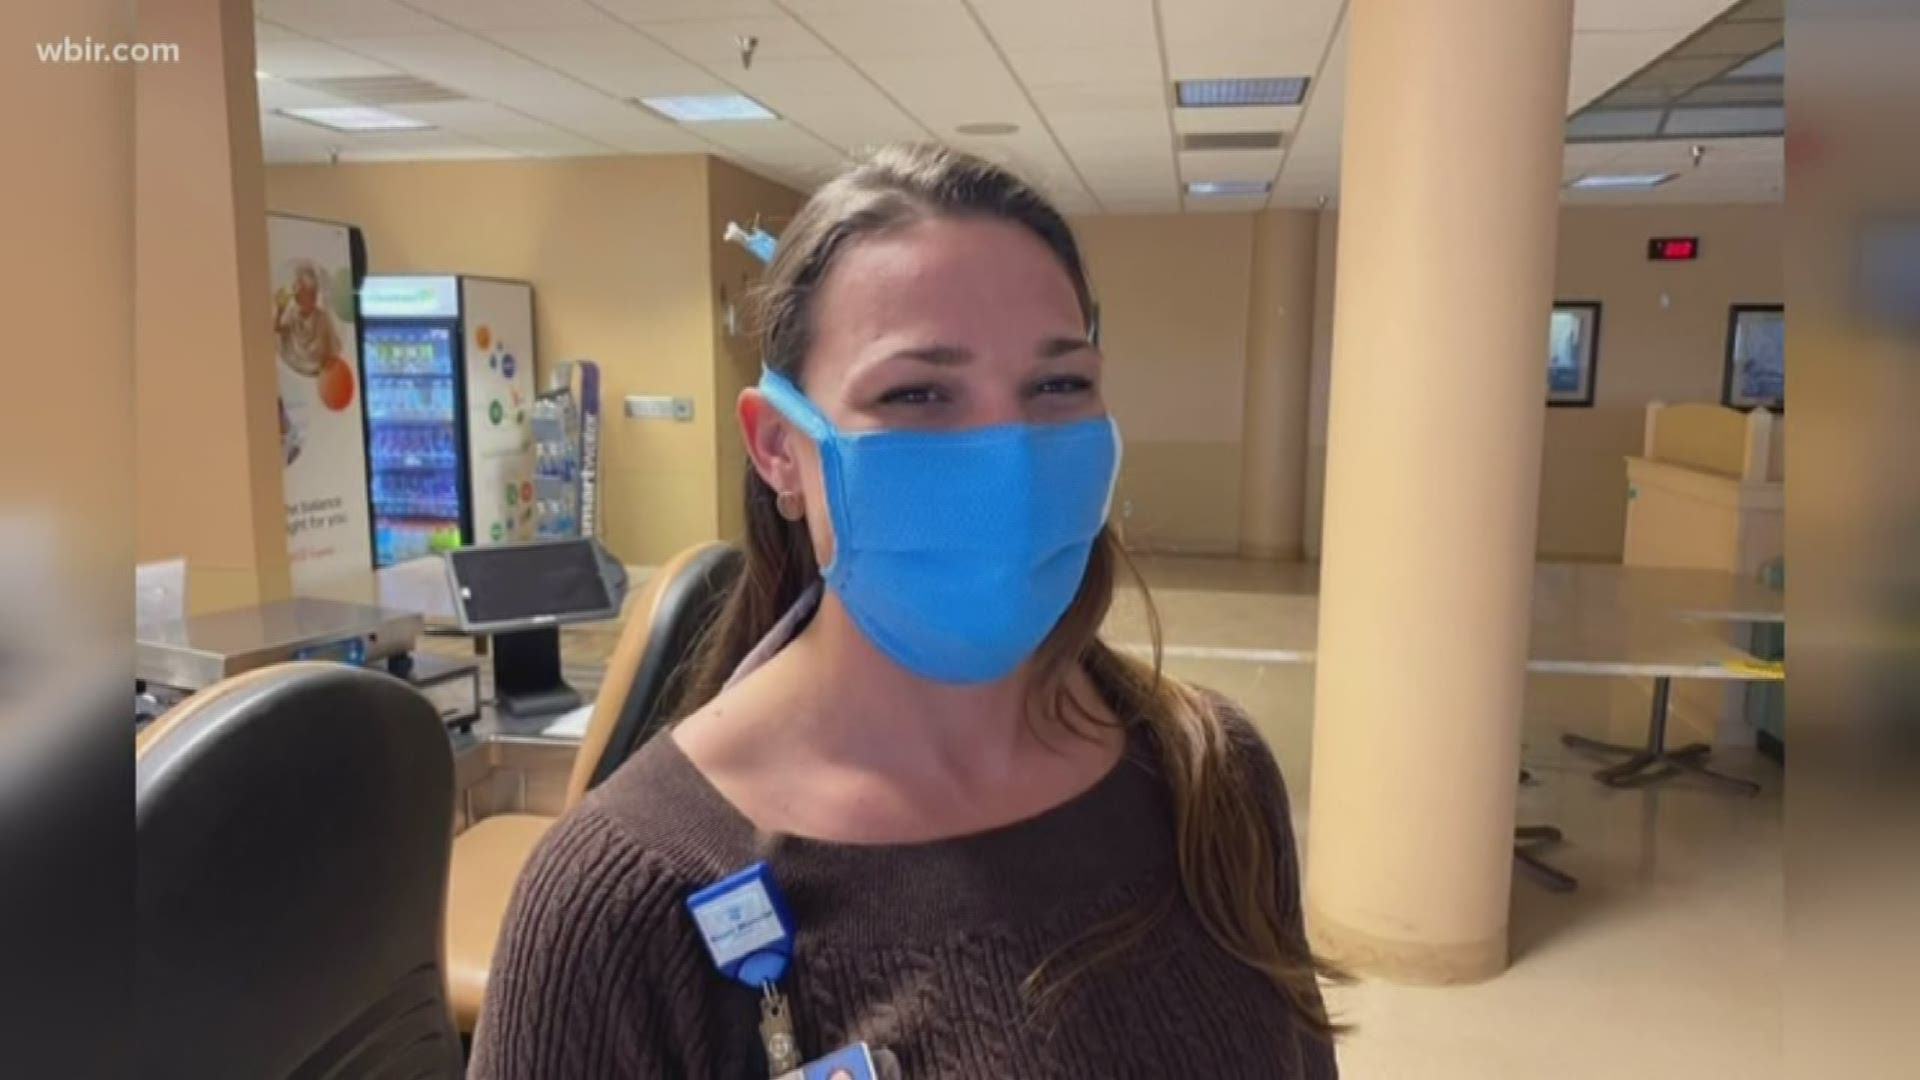 Hospital leaders say they are creating disposable gowns and N-95 masks for employees. Those masks have passed  a respirator fit test, according to the hospital.